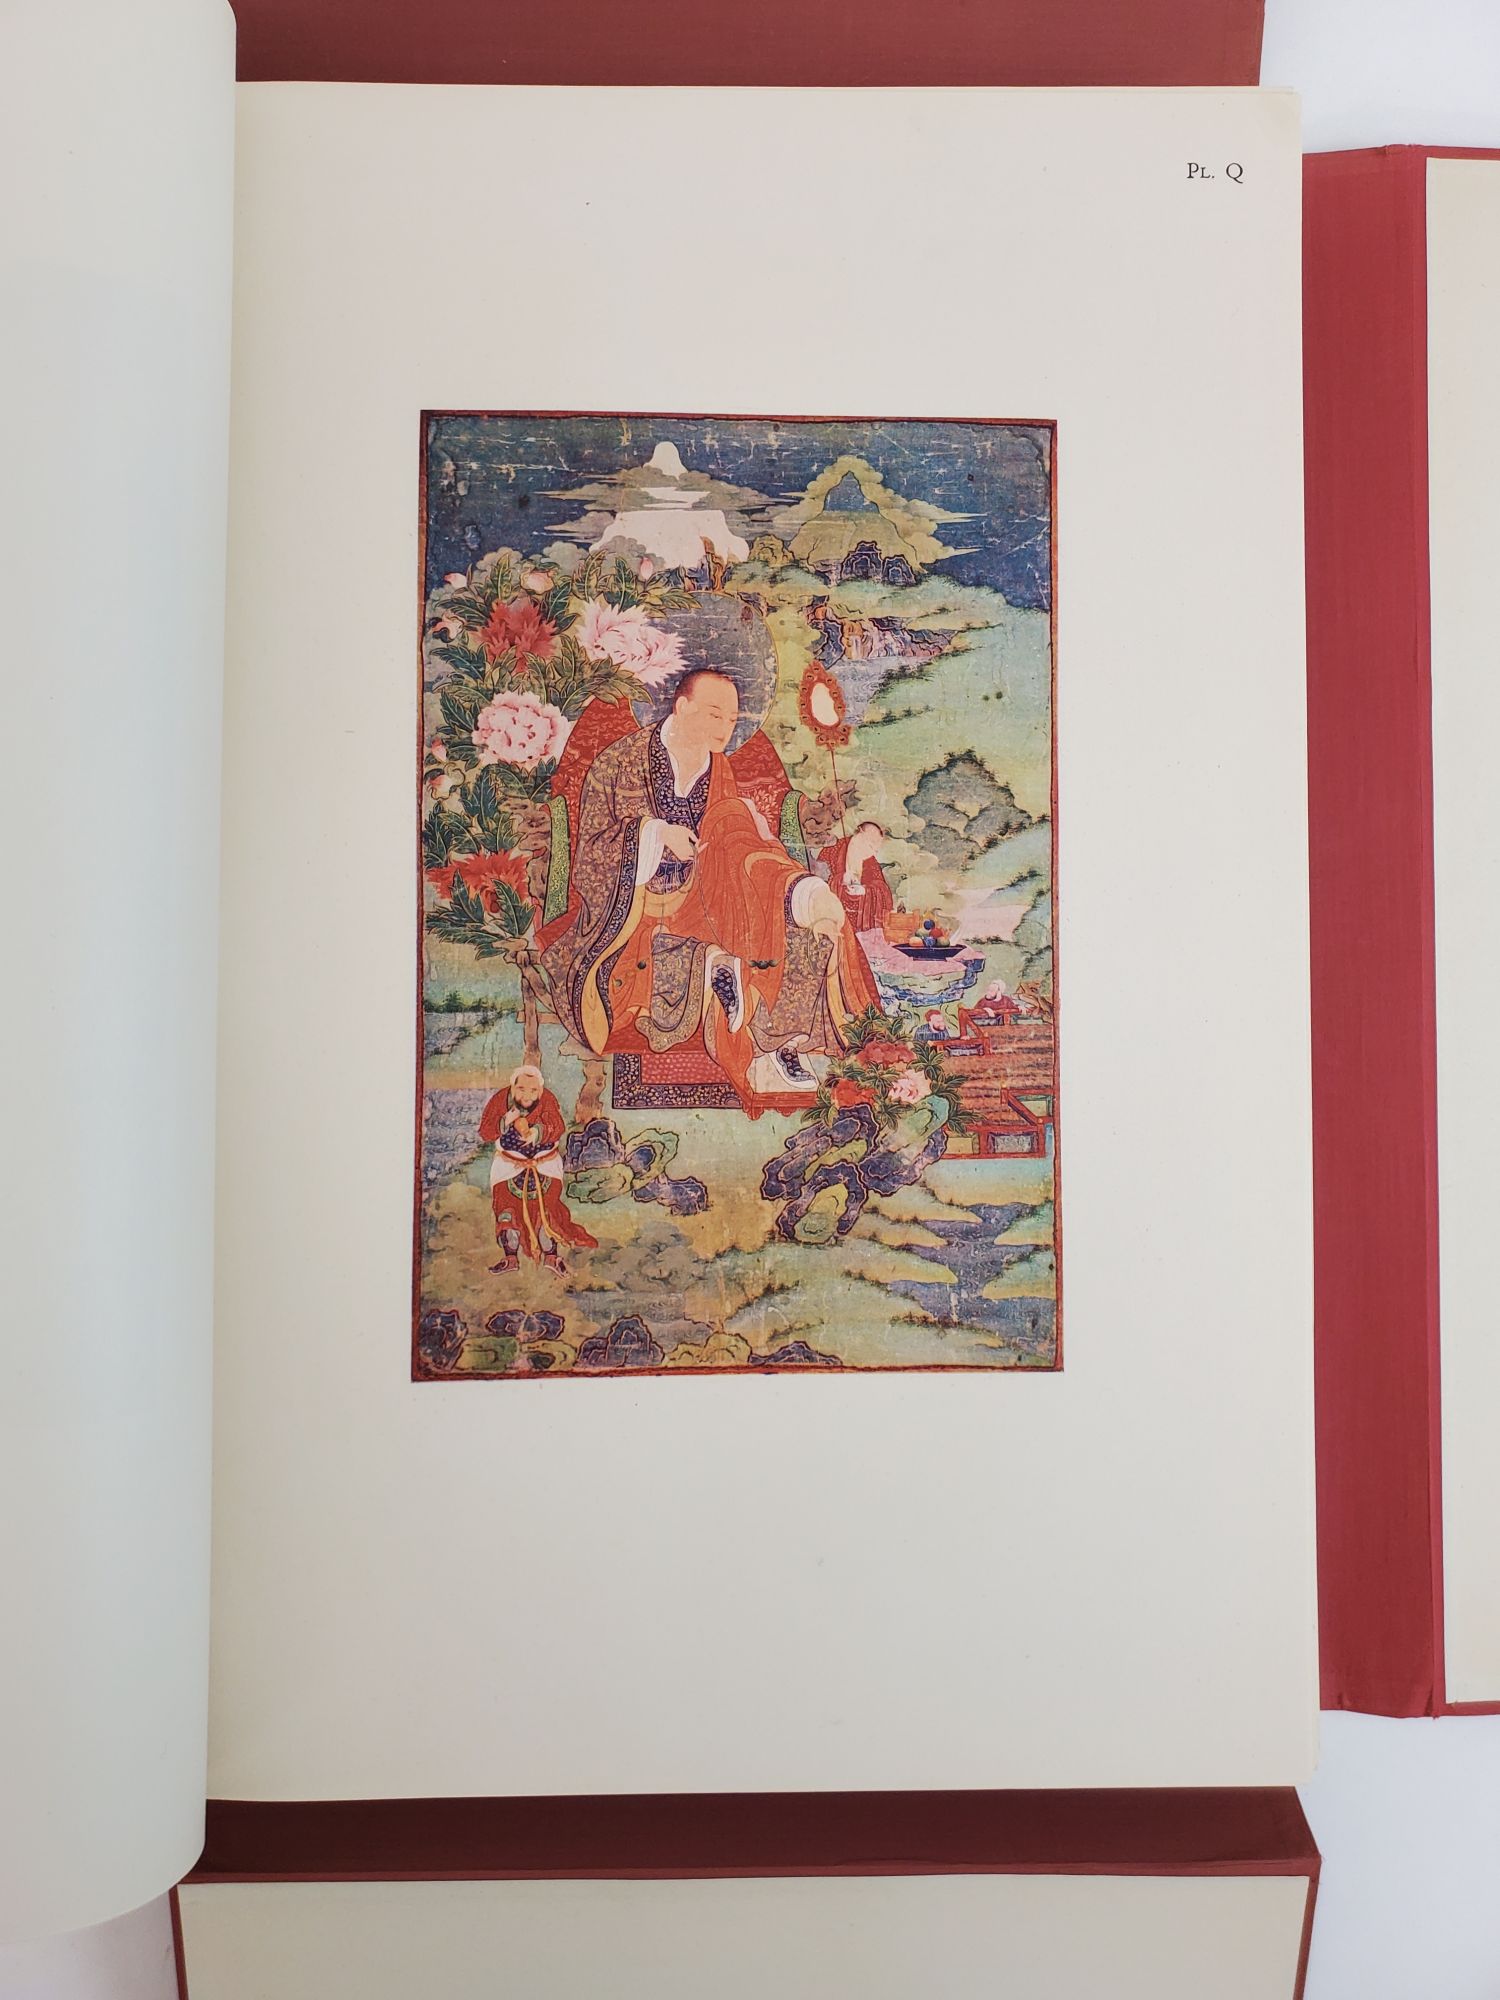 Product Image for TIBETAN PAINTED SCROLLS [Three Volumes]